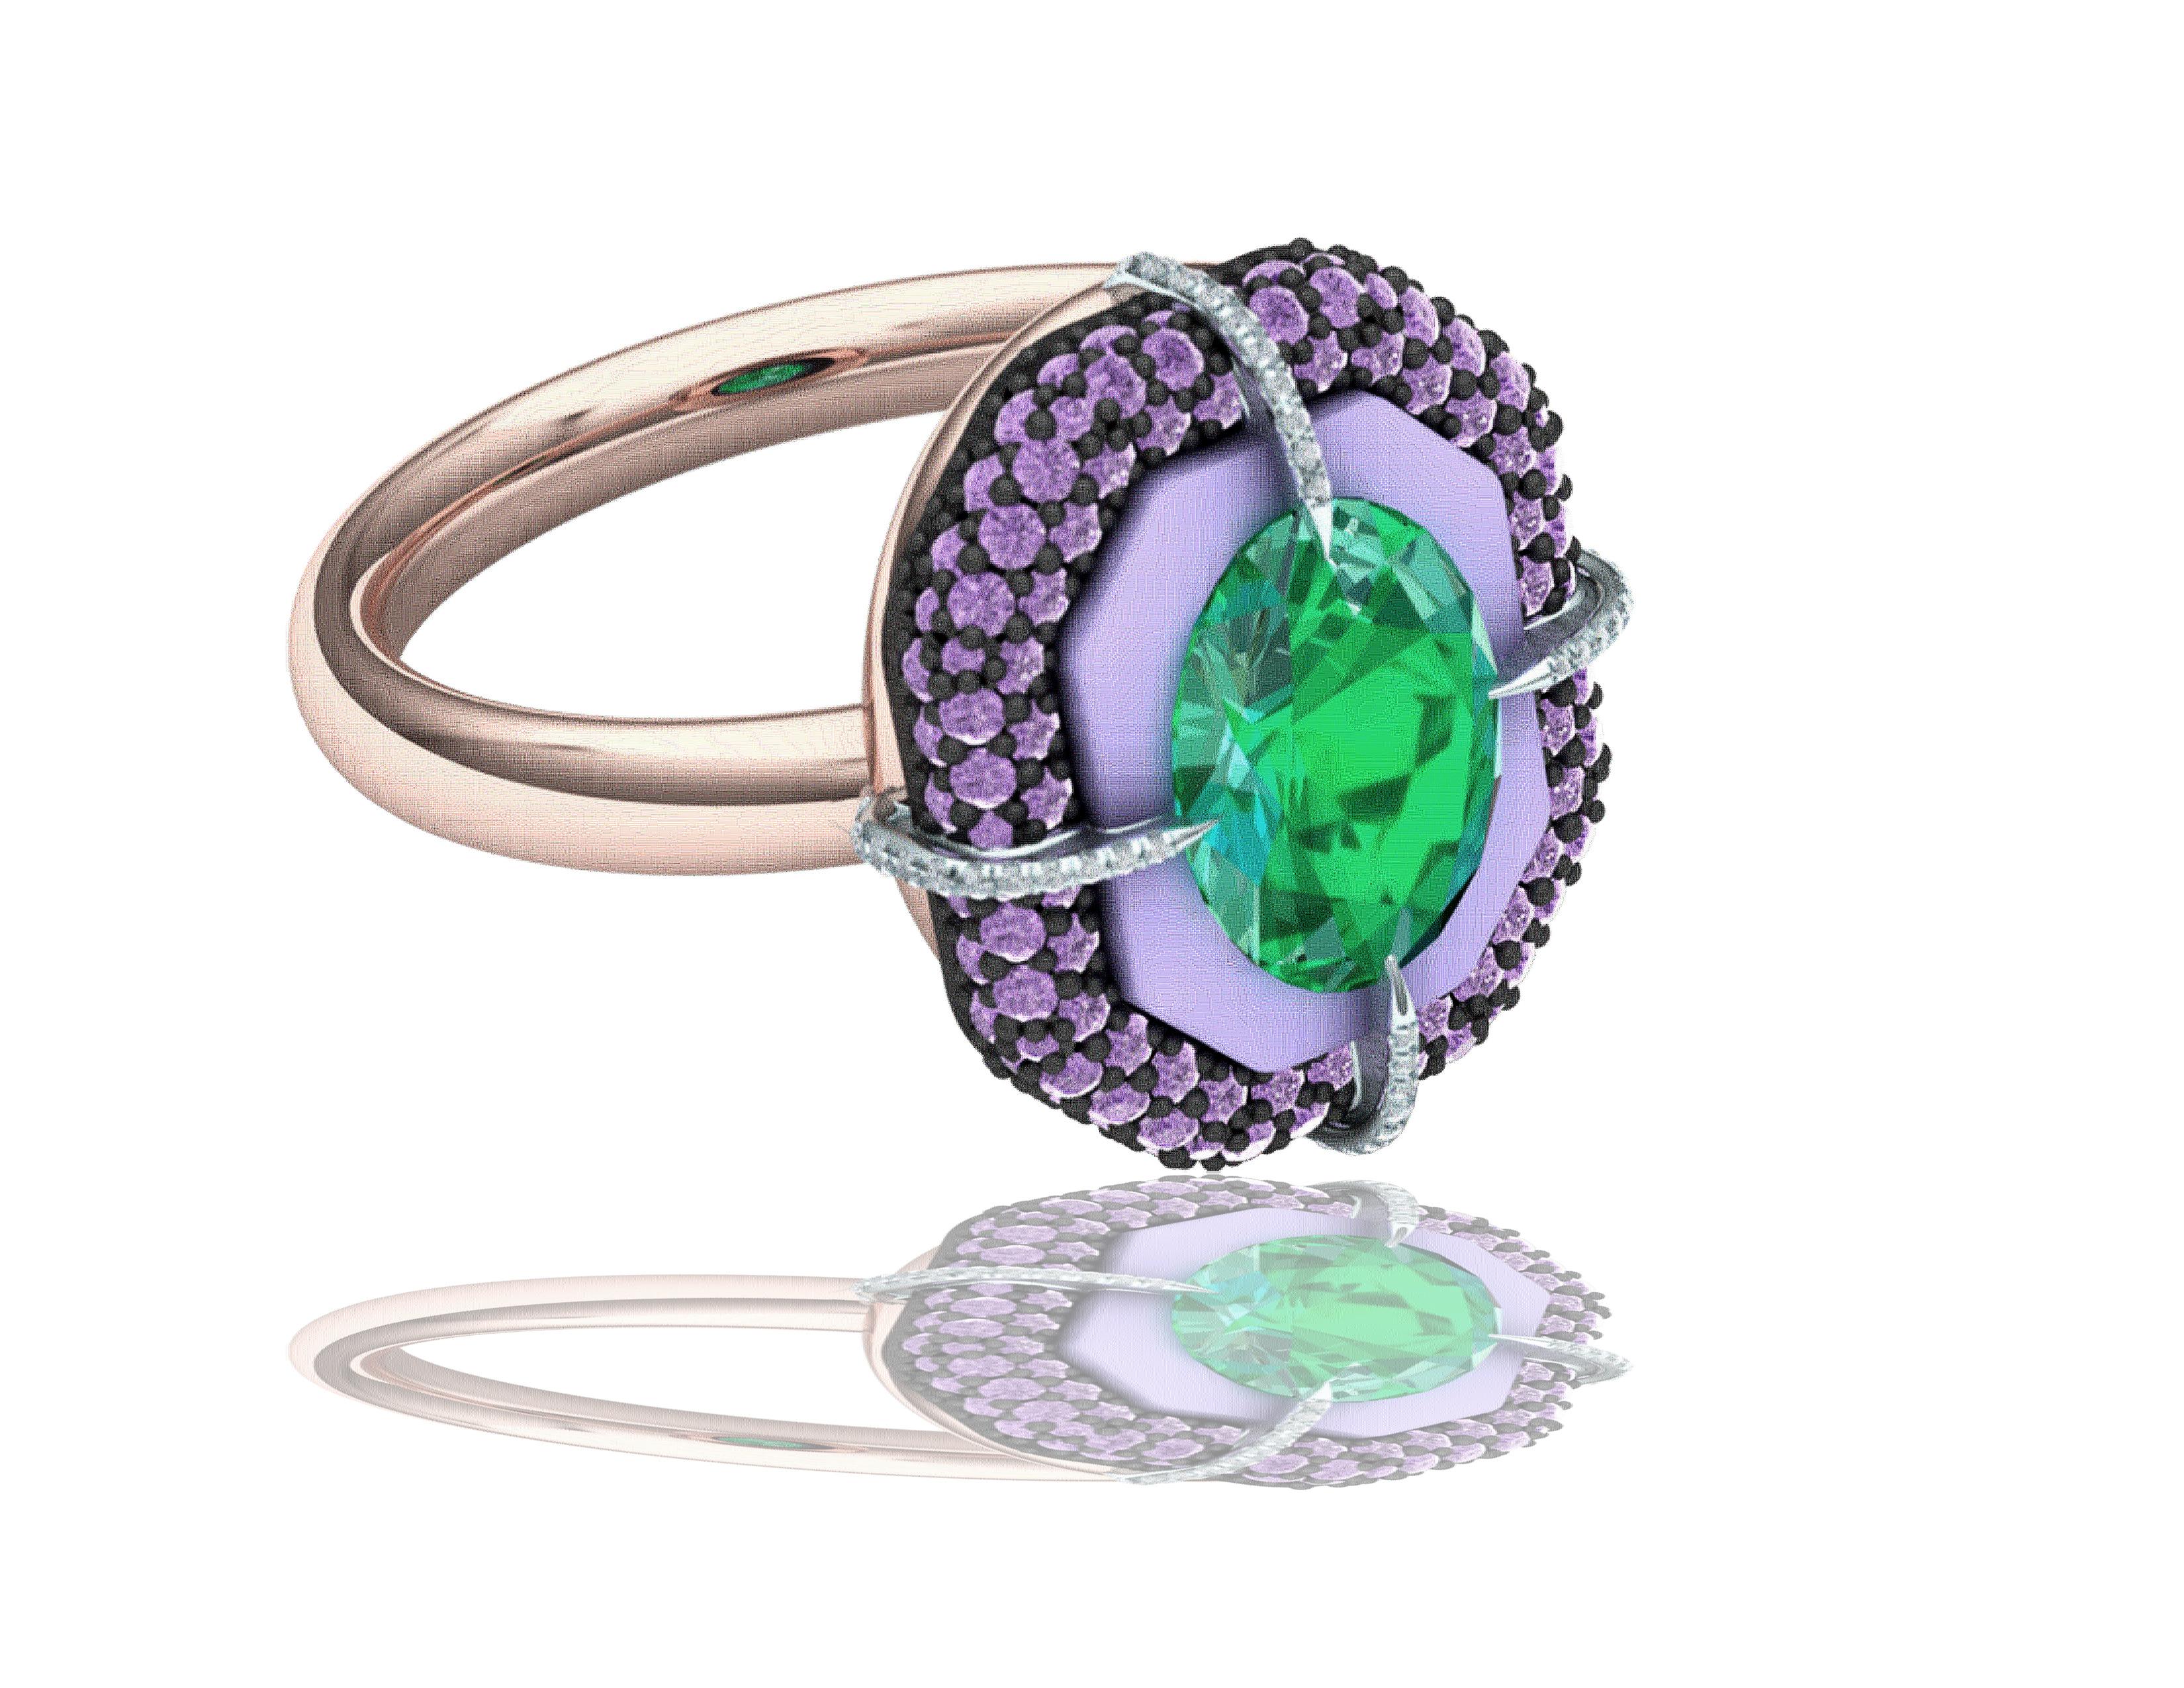 A stunning modern display of color and composition, this ring has a beautiful blend of rich green with light lavender purple.  The center stone is a 1-carat oval cut emerald which is set in a custom cut piece of calcedony.  These two stones are set